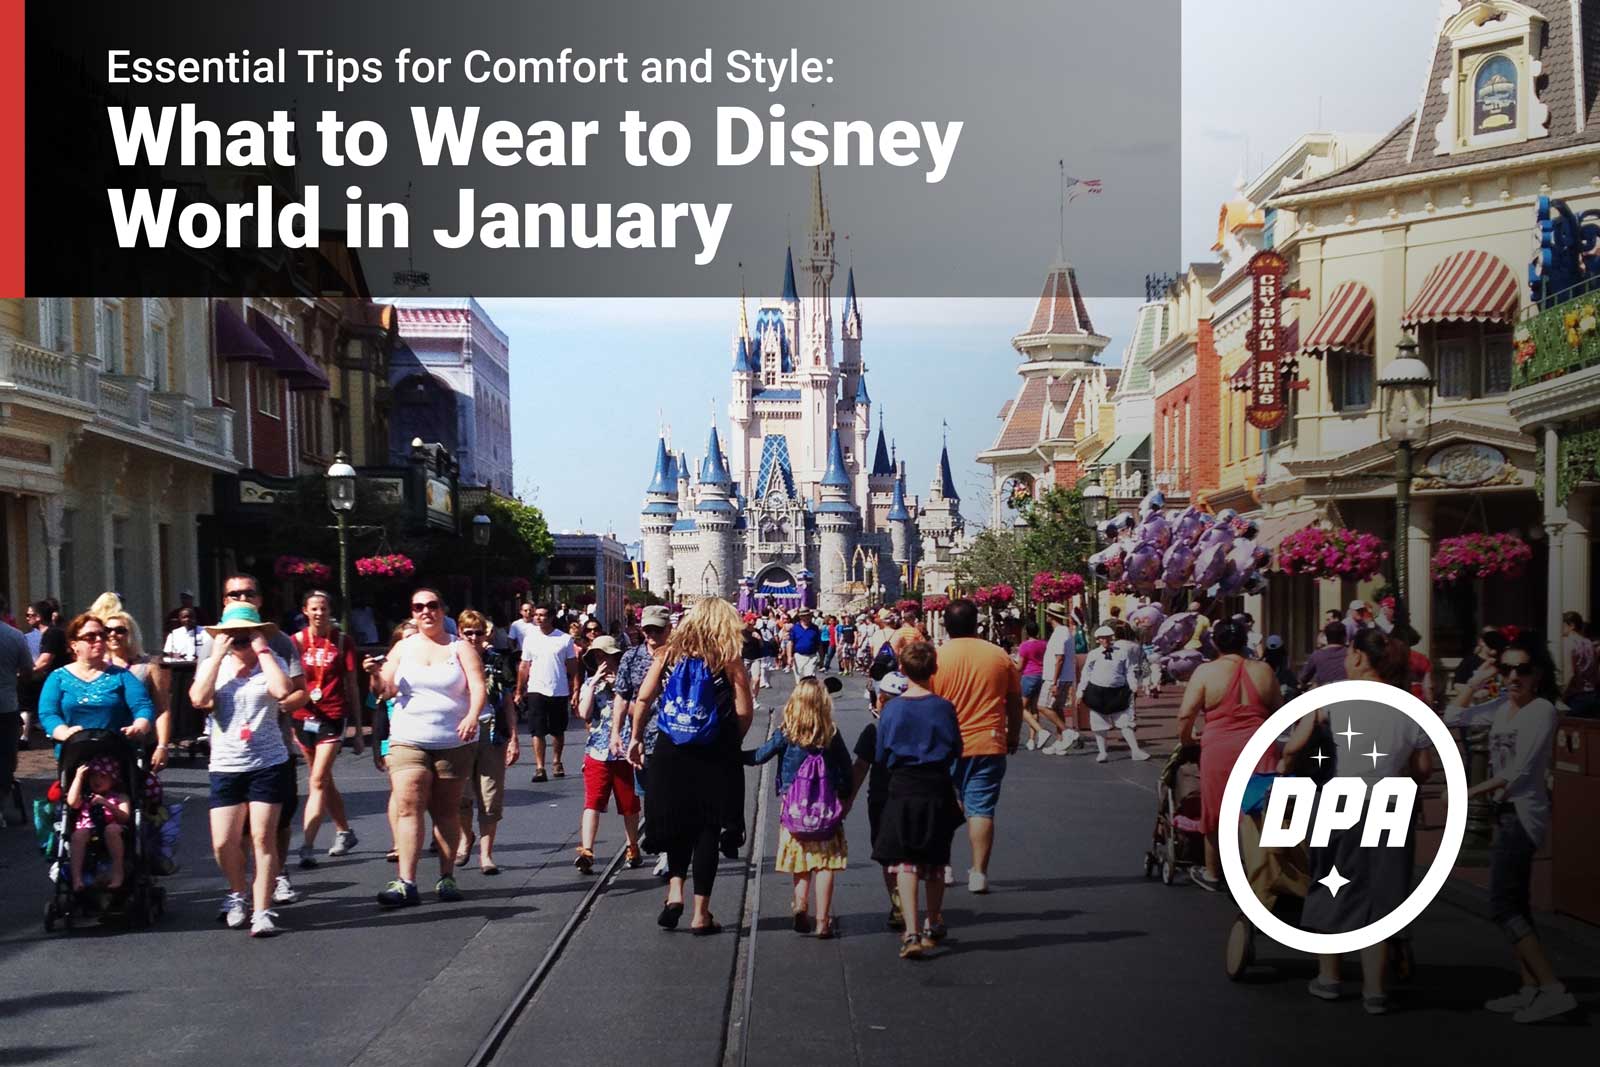 What to wear to Disney World in January